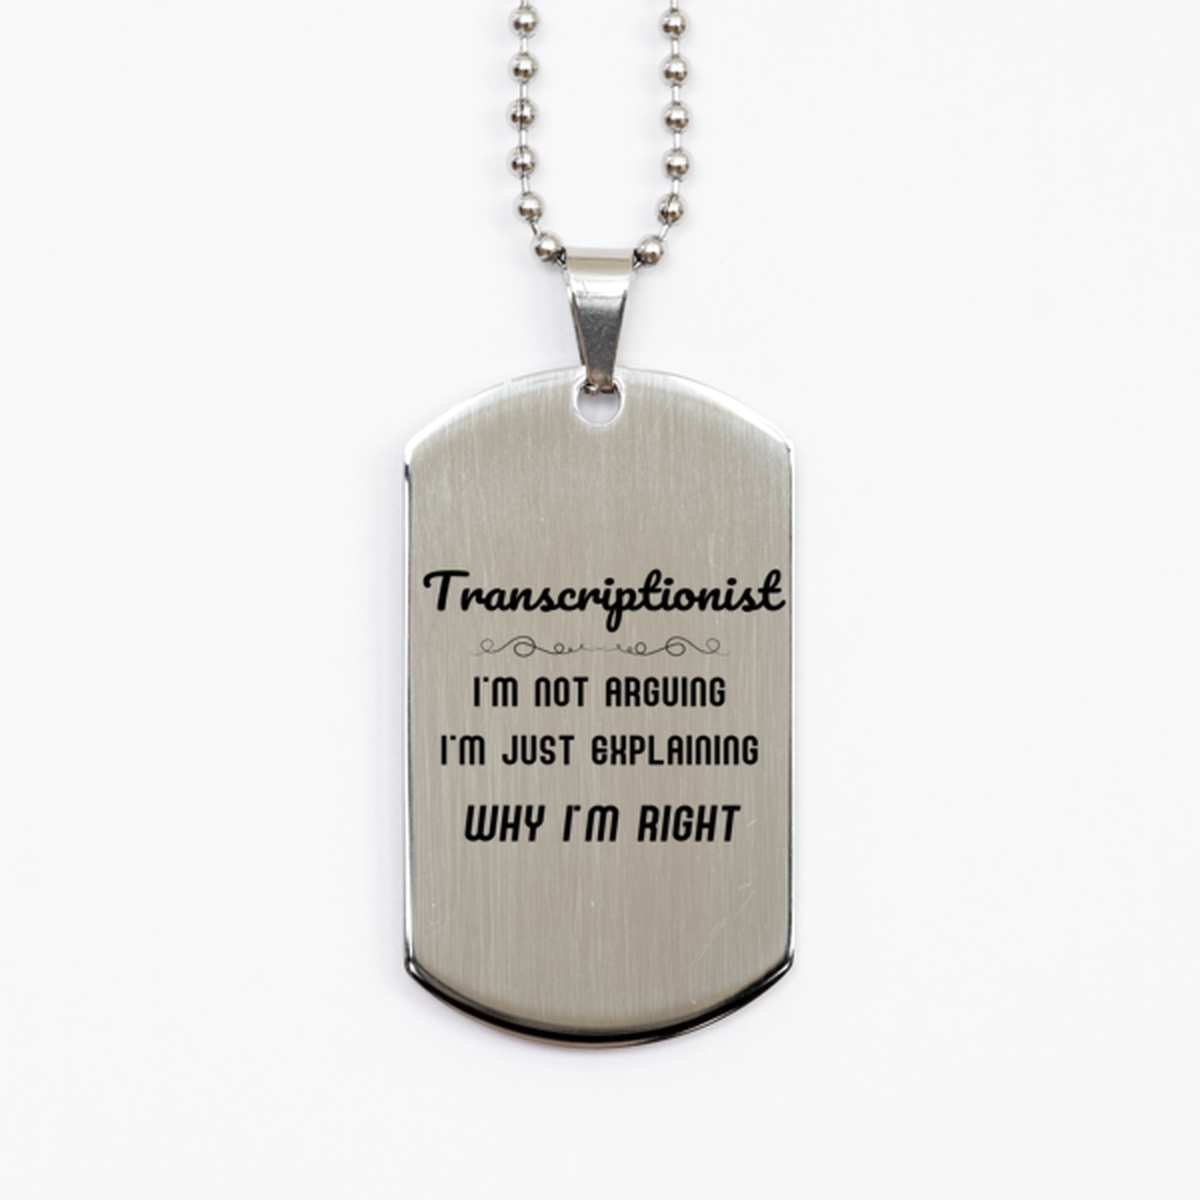 Transcriptionist I'm not Arguing. I'm Just Explaining Why I'm RIGHT Silver Dog Tag, Funny Saying Quote Transcriptionist Gifts For Transcriptionist Graduation Birthday Christmas Gifts for Men Women Coworker